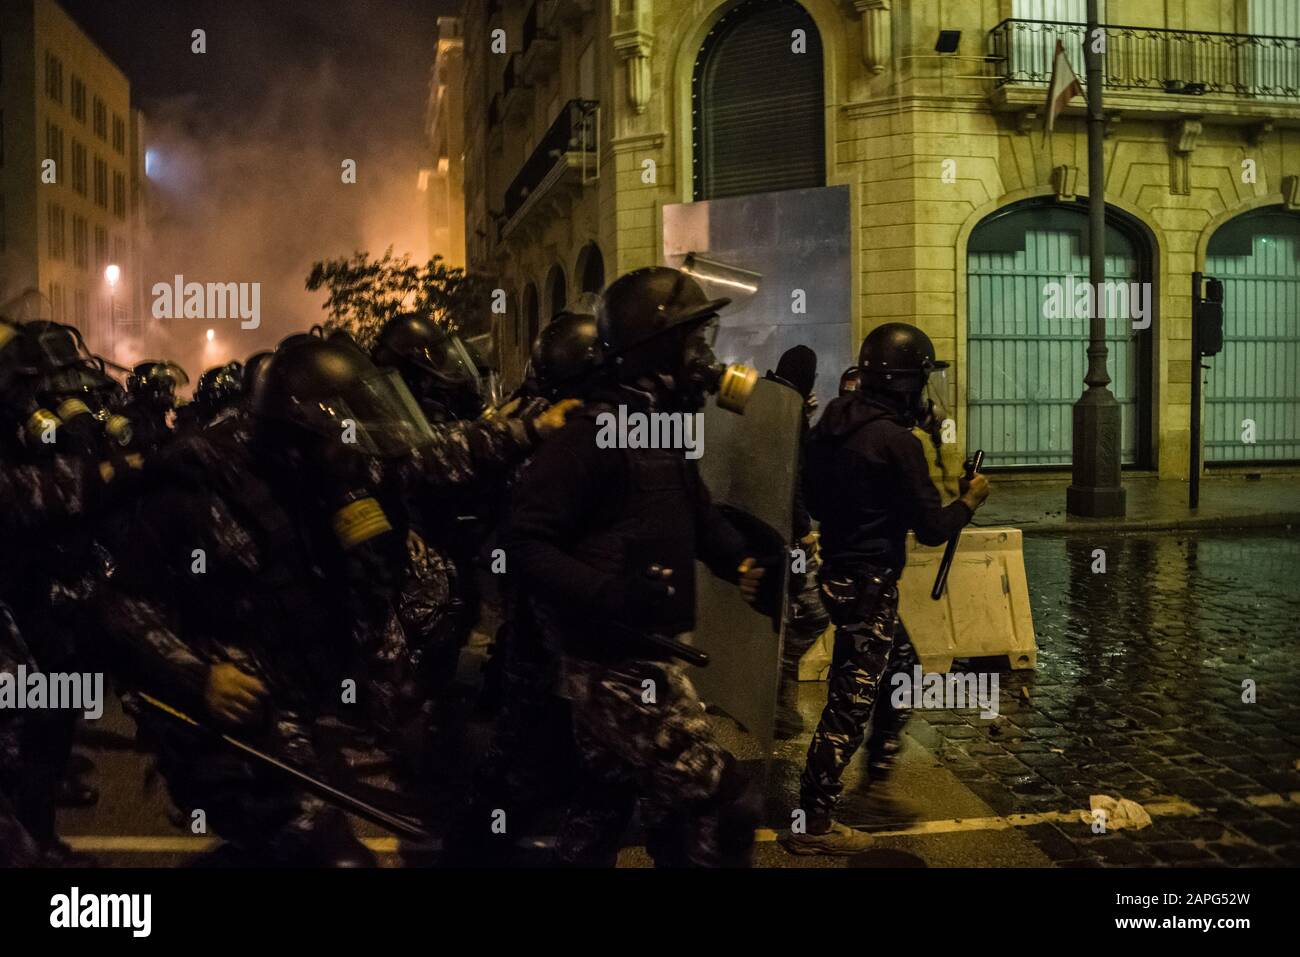 Beirut, Lebanon. 22nd Jan, 2020. Police charge protesters reacting to interim prime minister Hassan Diab's finalisation of a new cabinet for Lebanon, as riots break out in the Downtown area. Credit: Elizabeth Fitt/Alamy Live News Stock Photo